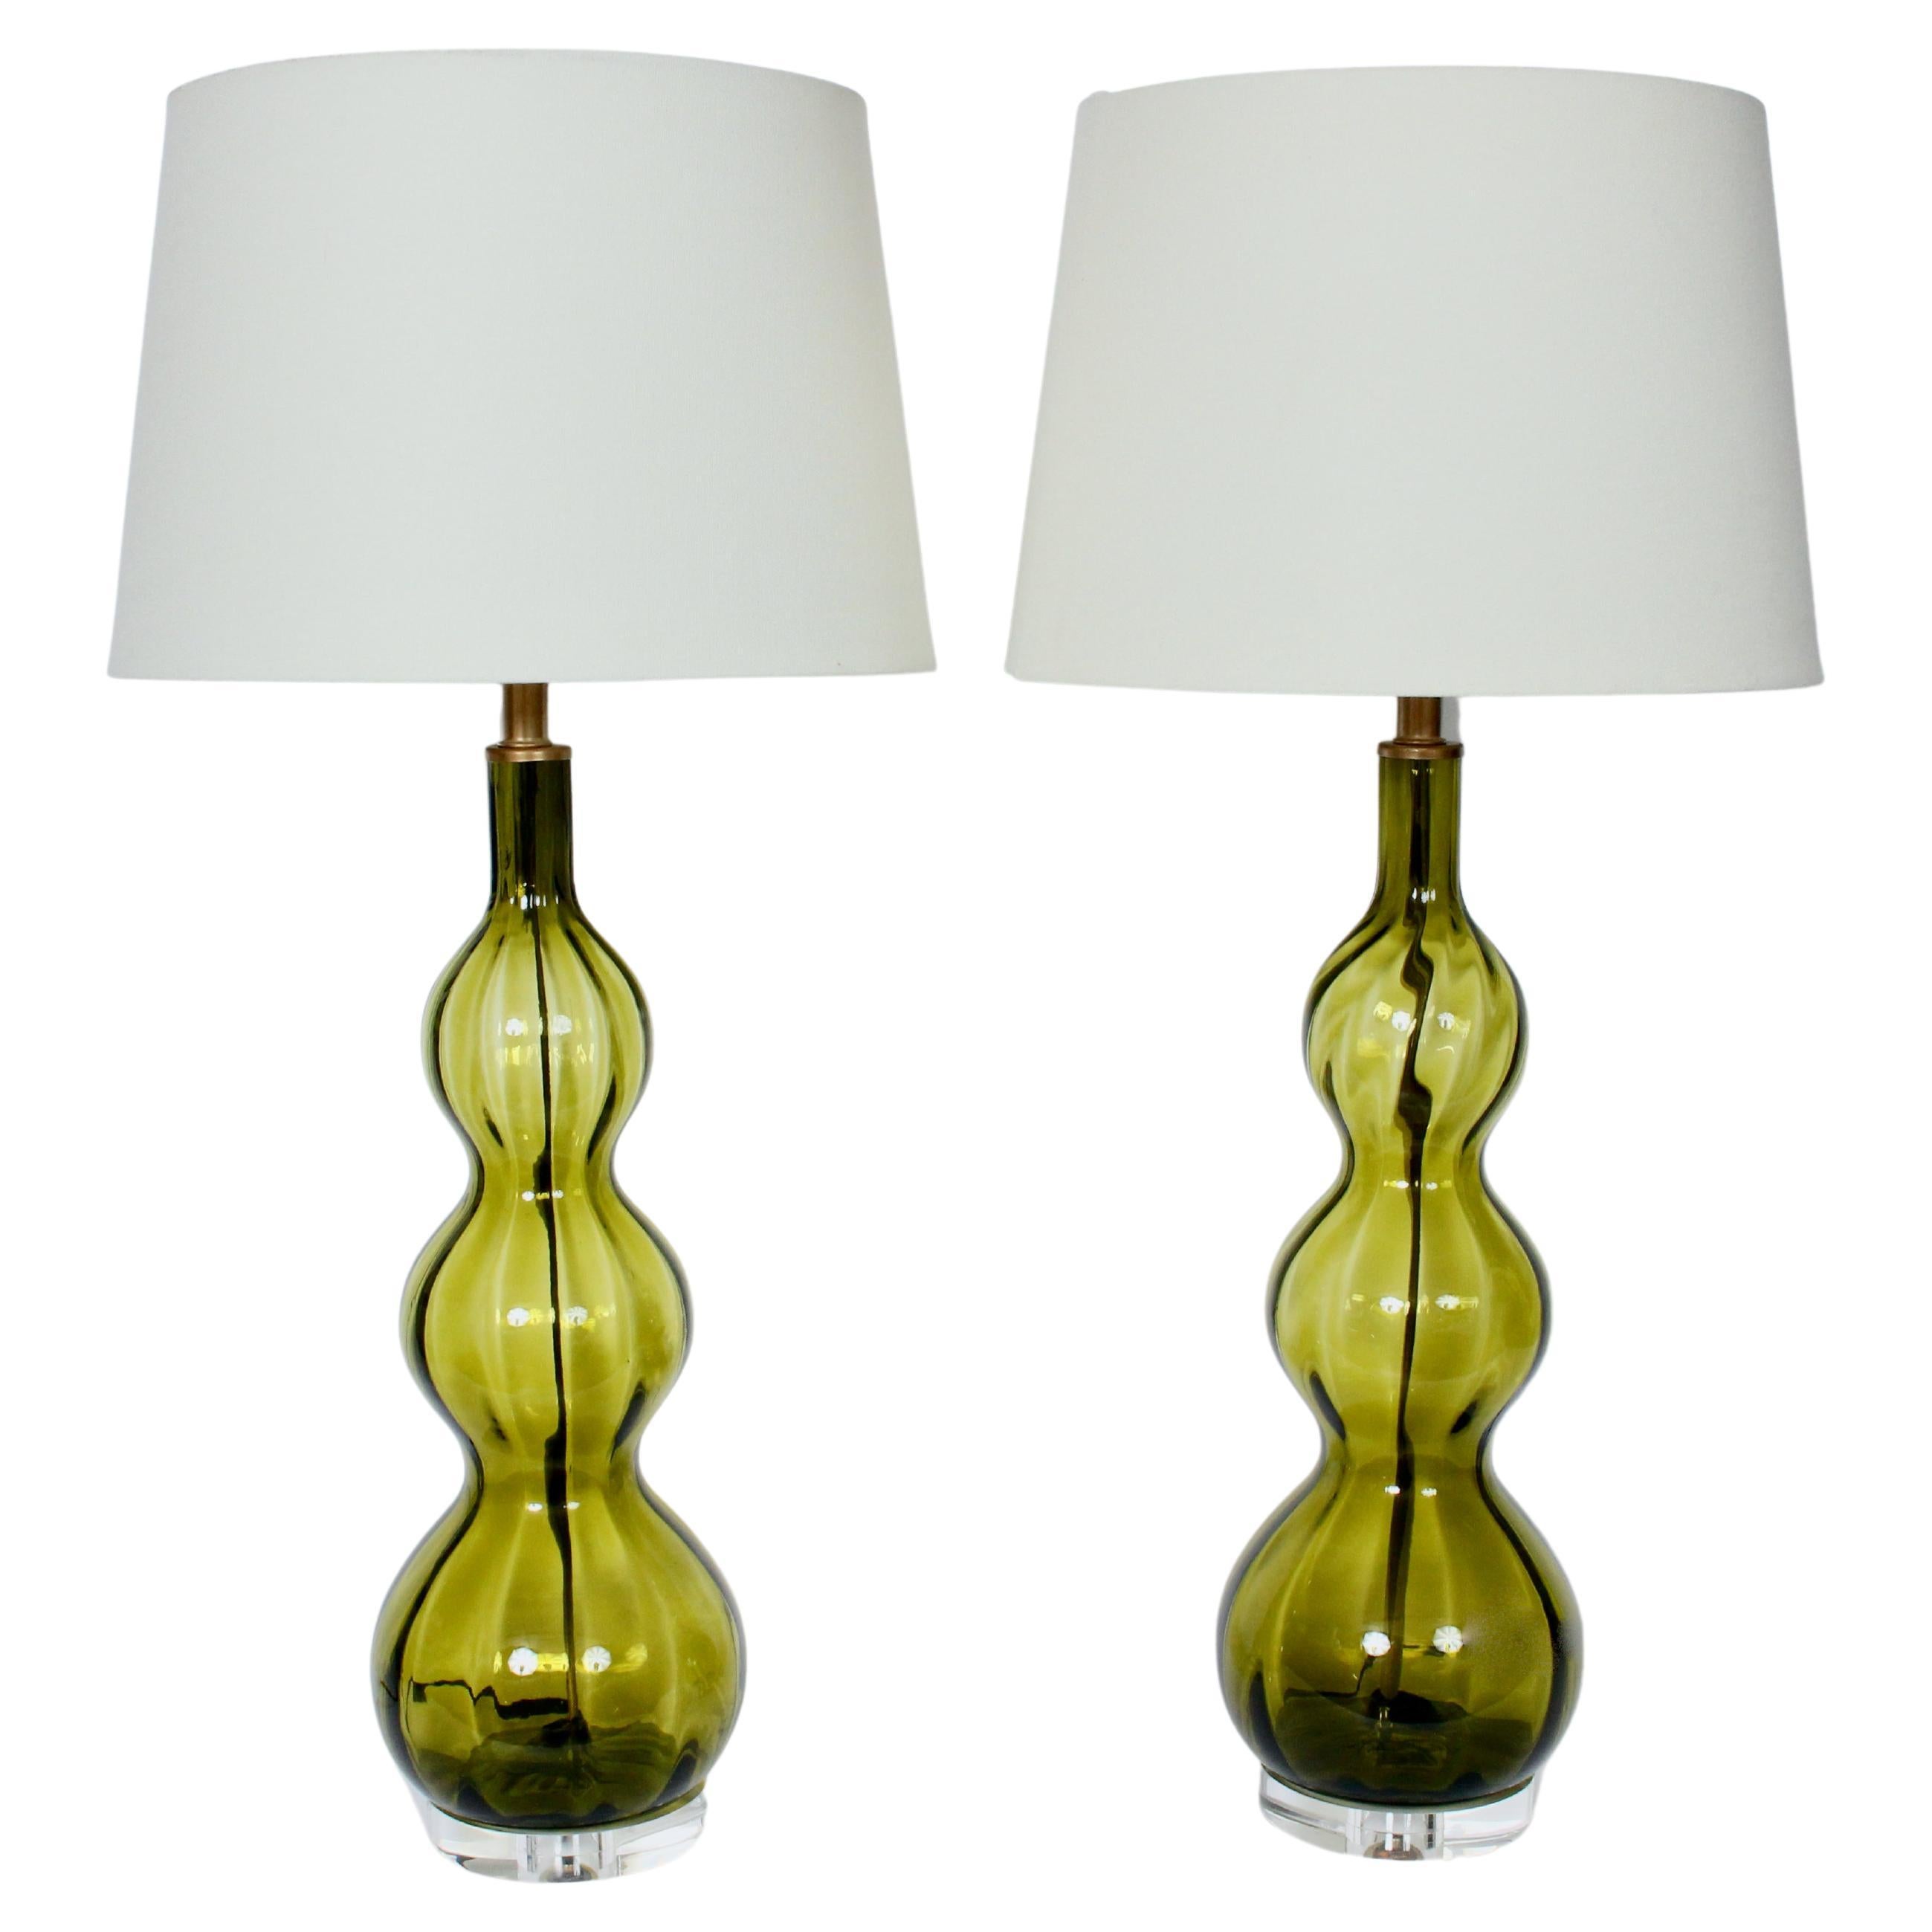 Tall Pair of Stacked Triple Gourd Olive Green Art Glass Table Lamps, 1950s